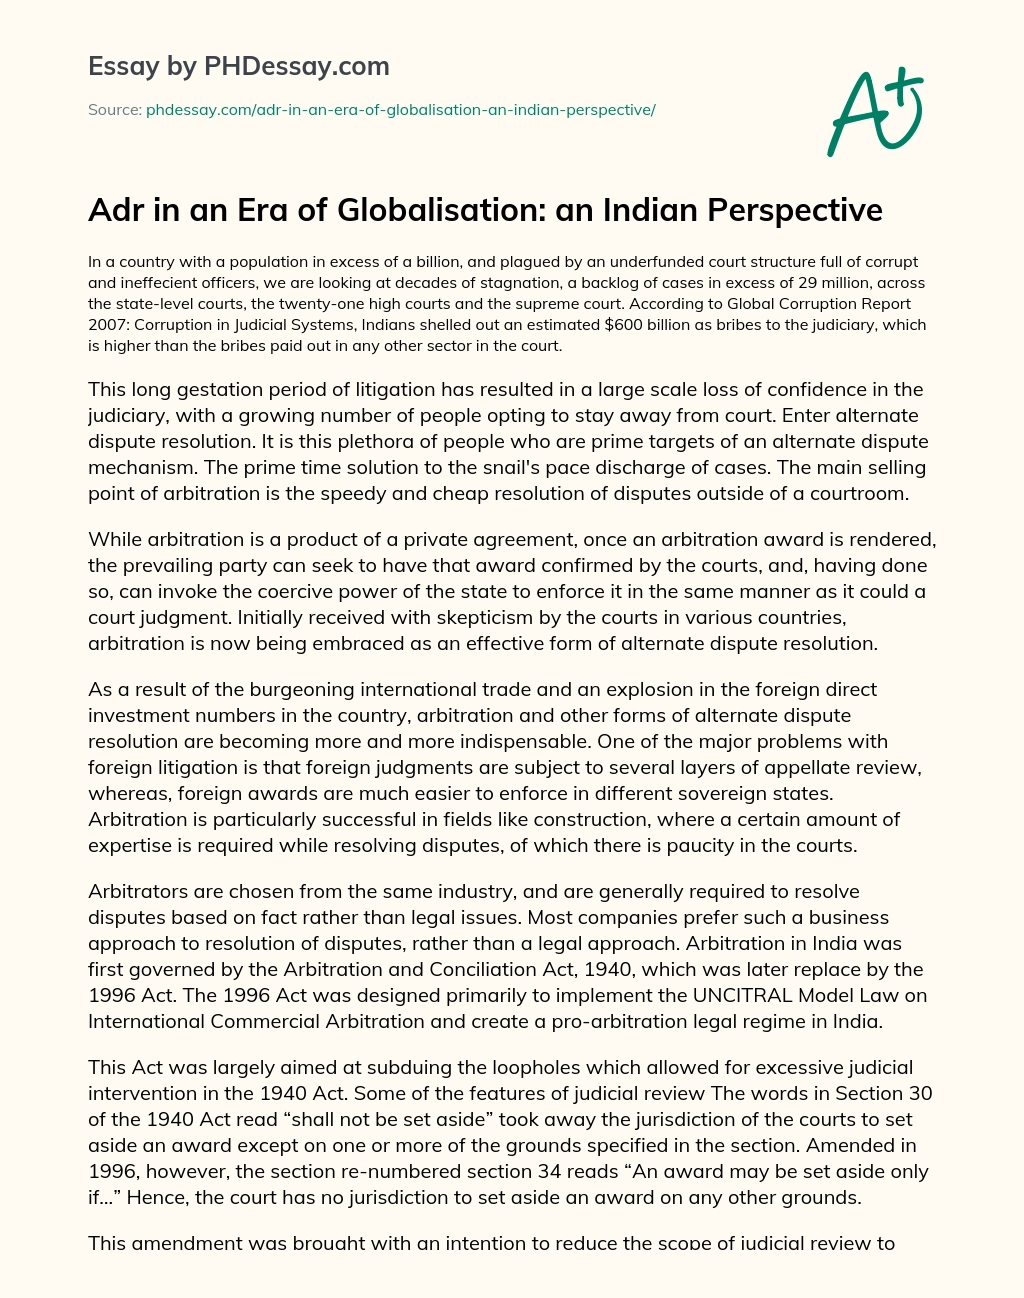 Adr in an Era of Globalisation: an Indian Perspective essay